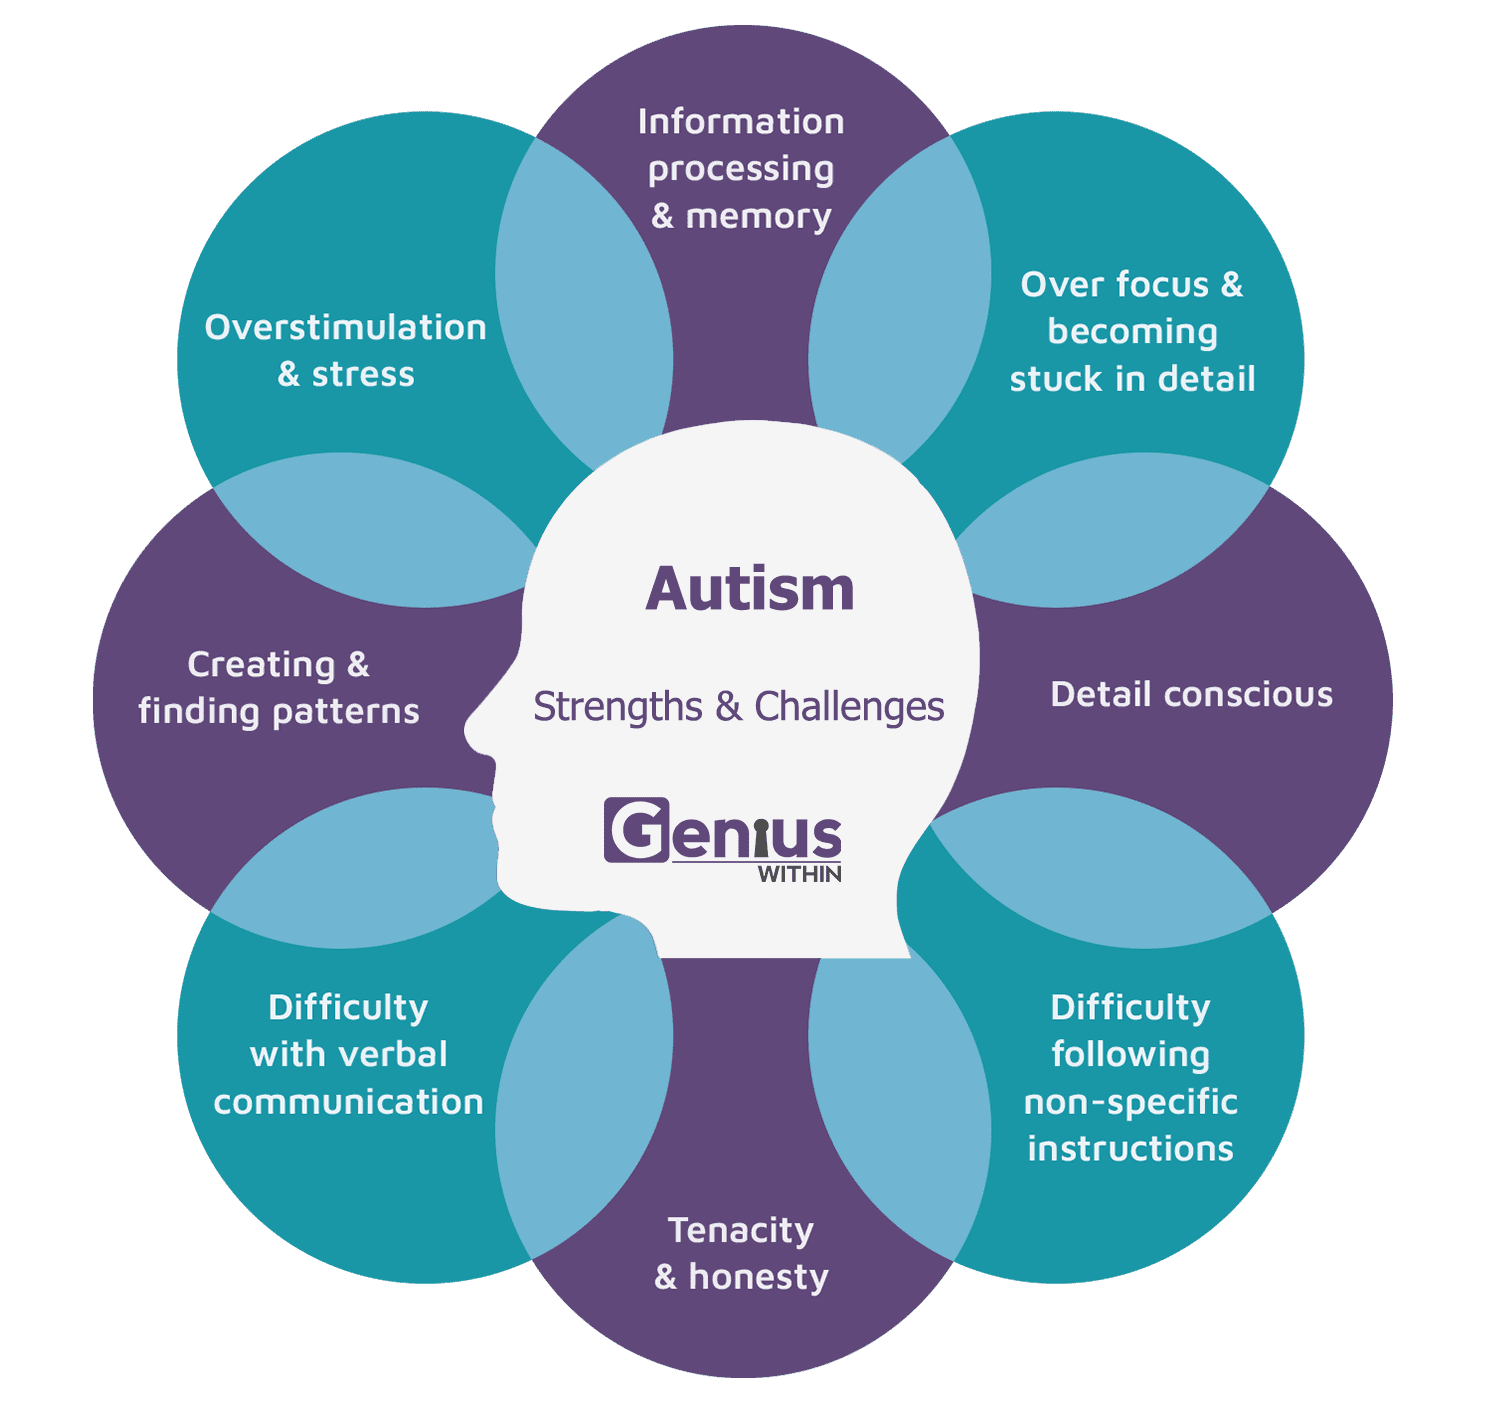 Info graphic with head at the centre and overlapping text bubbles in a circle around it. Title reads: Autism, stengths and challenges. The strengths and challenges are listed as follows; information processing and memory, over focus and becoming stuck in detail, detail conscious, difficulty following non-specific instructions, tenacity and honesty, difficulty with verbal communication, creating and finding patterns, overstimulation and stress.